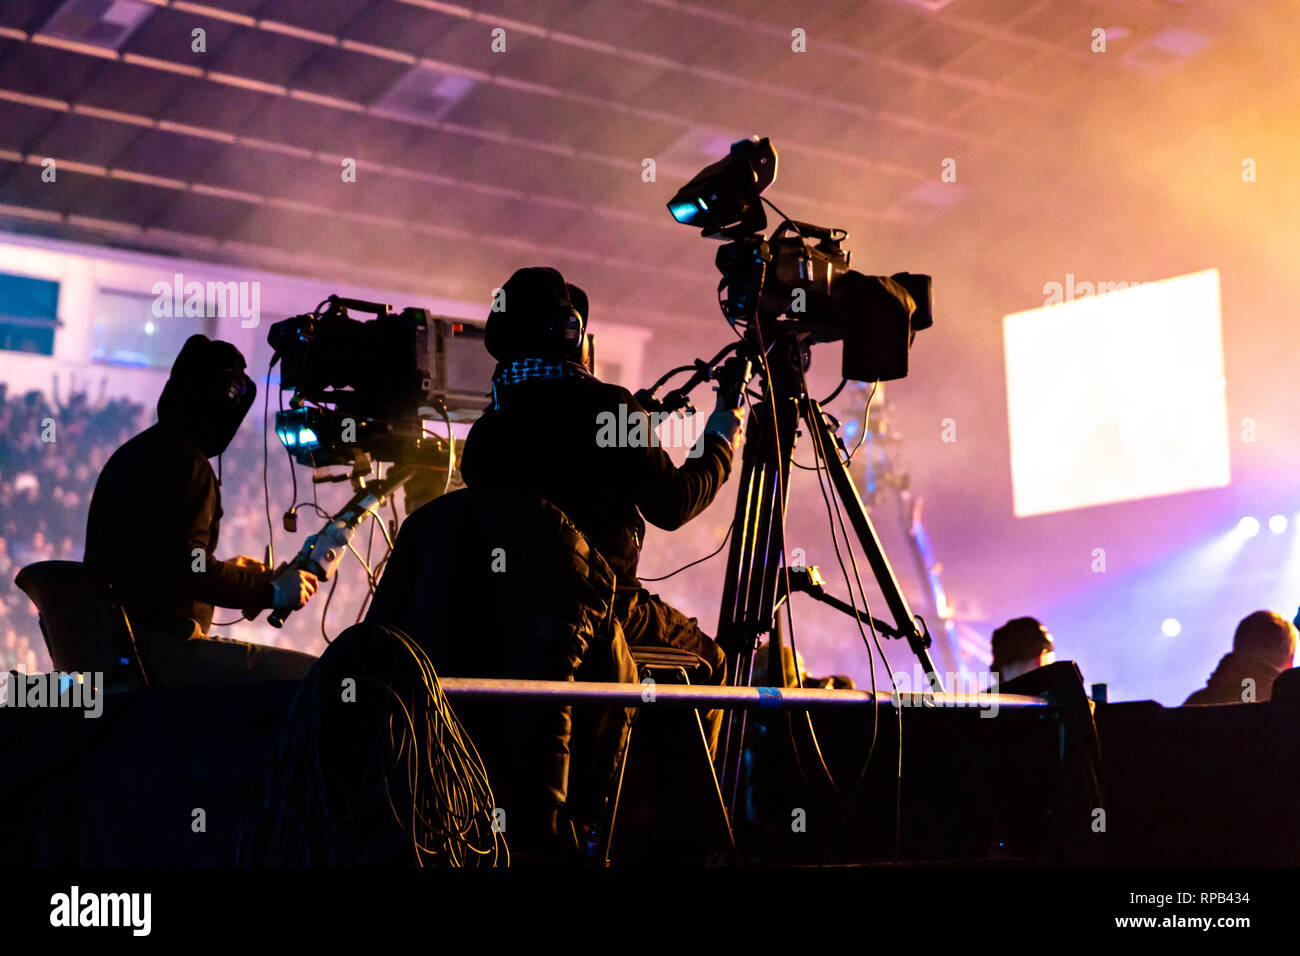 A group of cameramen working during the concert. Television broadcast event. Silhouettes of workers against the background of colorful beams. Stock Photo